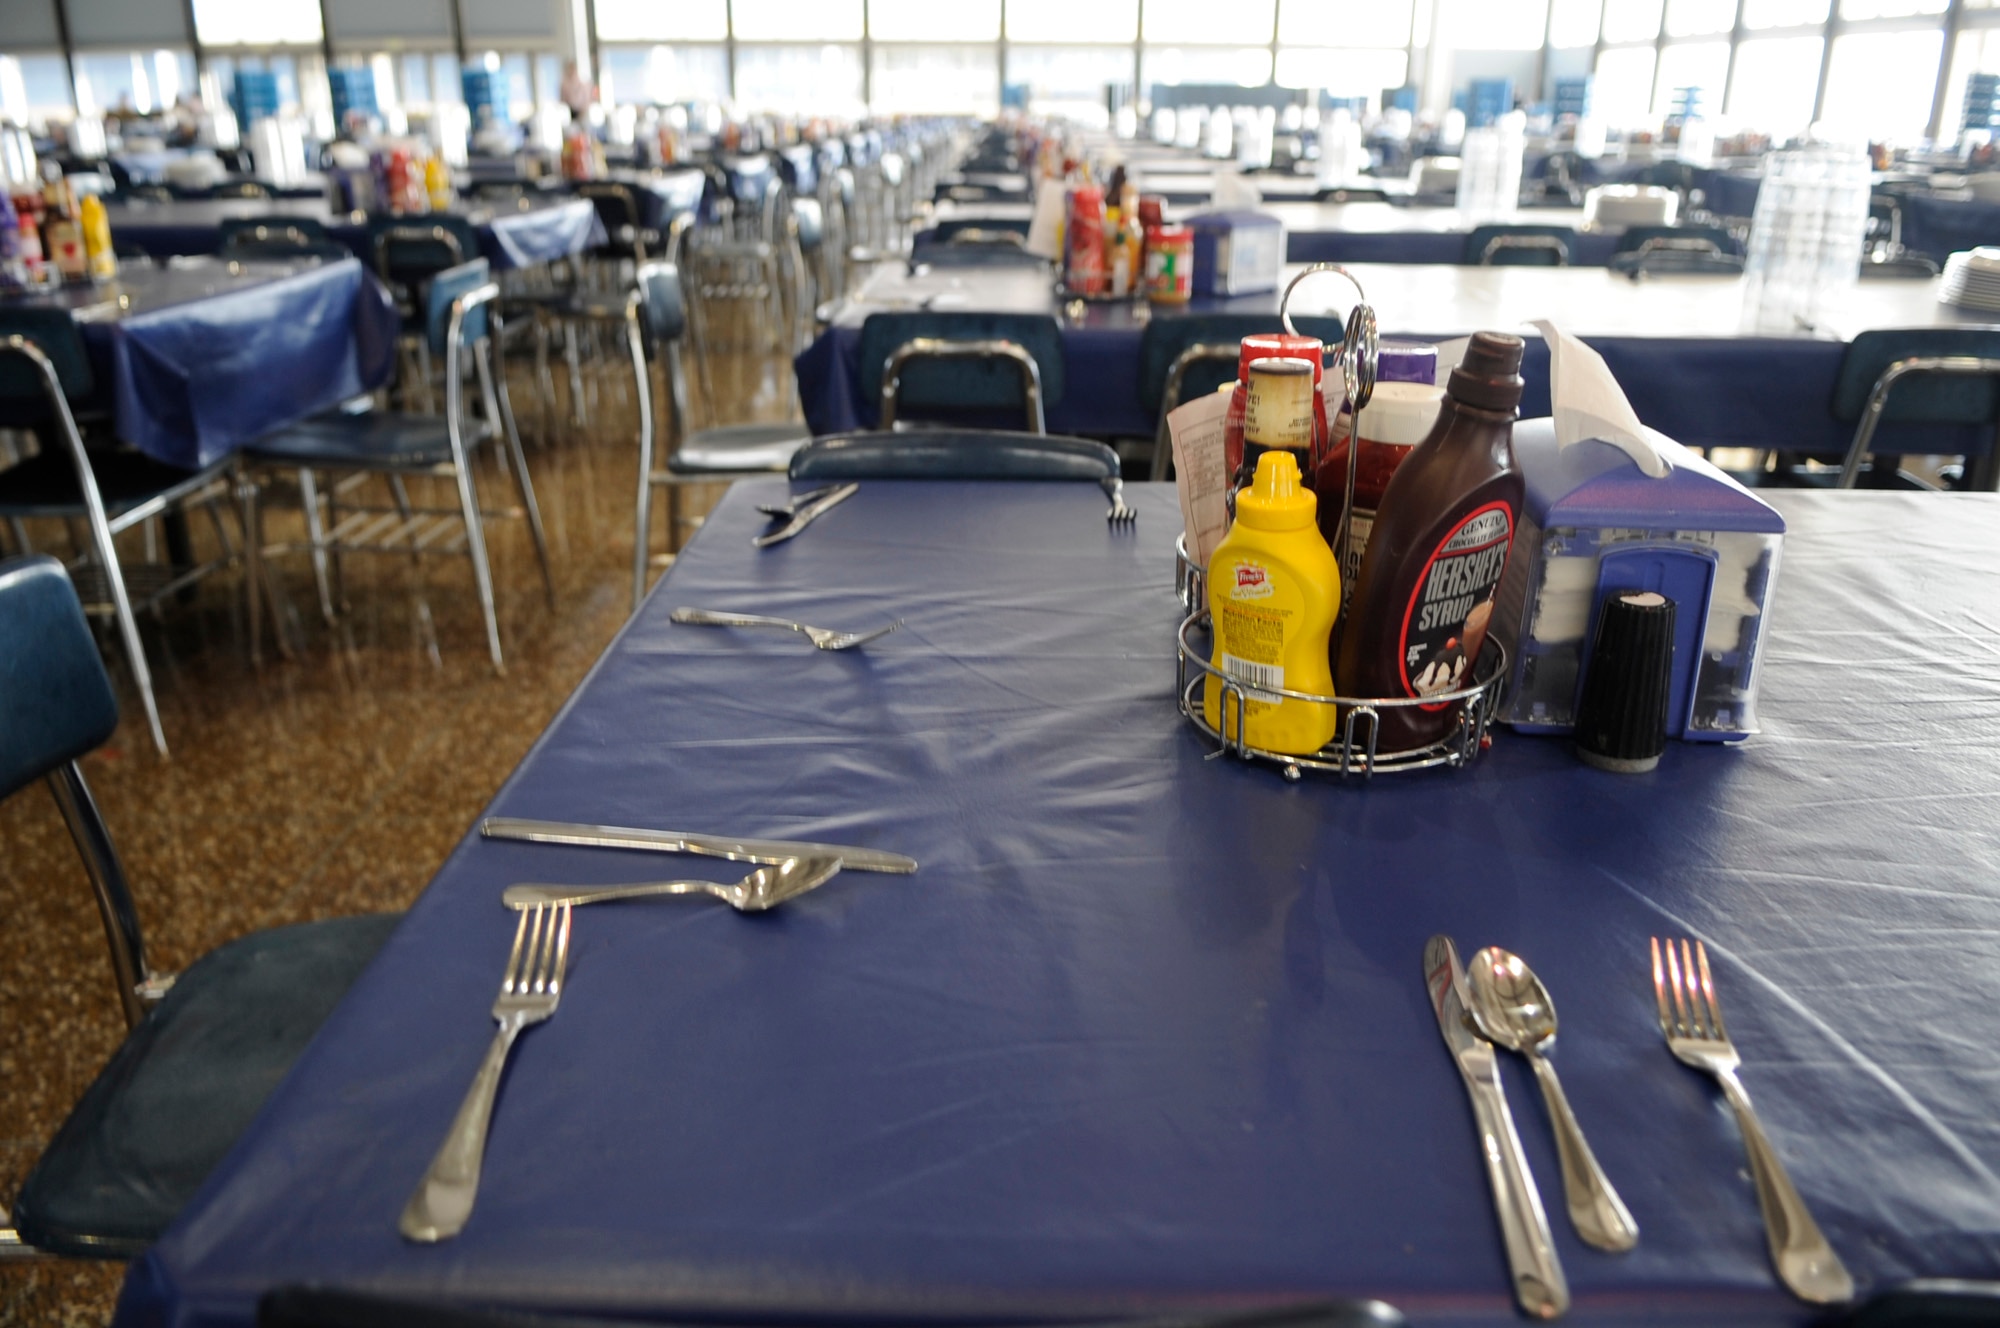 Tables are being set up for lunch Jan. 23 at Mitchell Hall Cadet Dining Facility at the U.S. Air Force Academy in Colorado Springs, Colo. The dining facility feeds approximately 4450 cadets and sits on 1.75 acres. (U.S Air Force photo/Staff Sgt. Desiree N. Palacios)